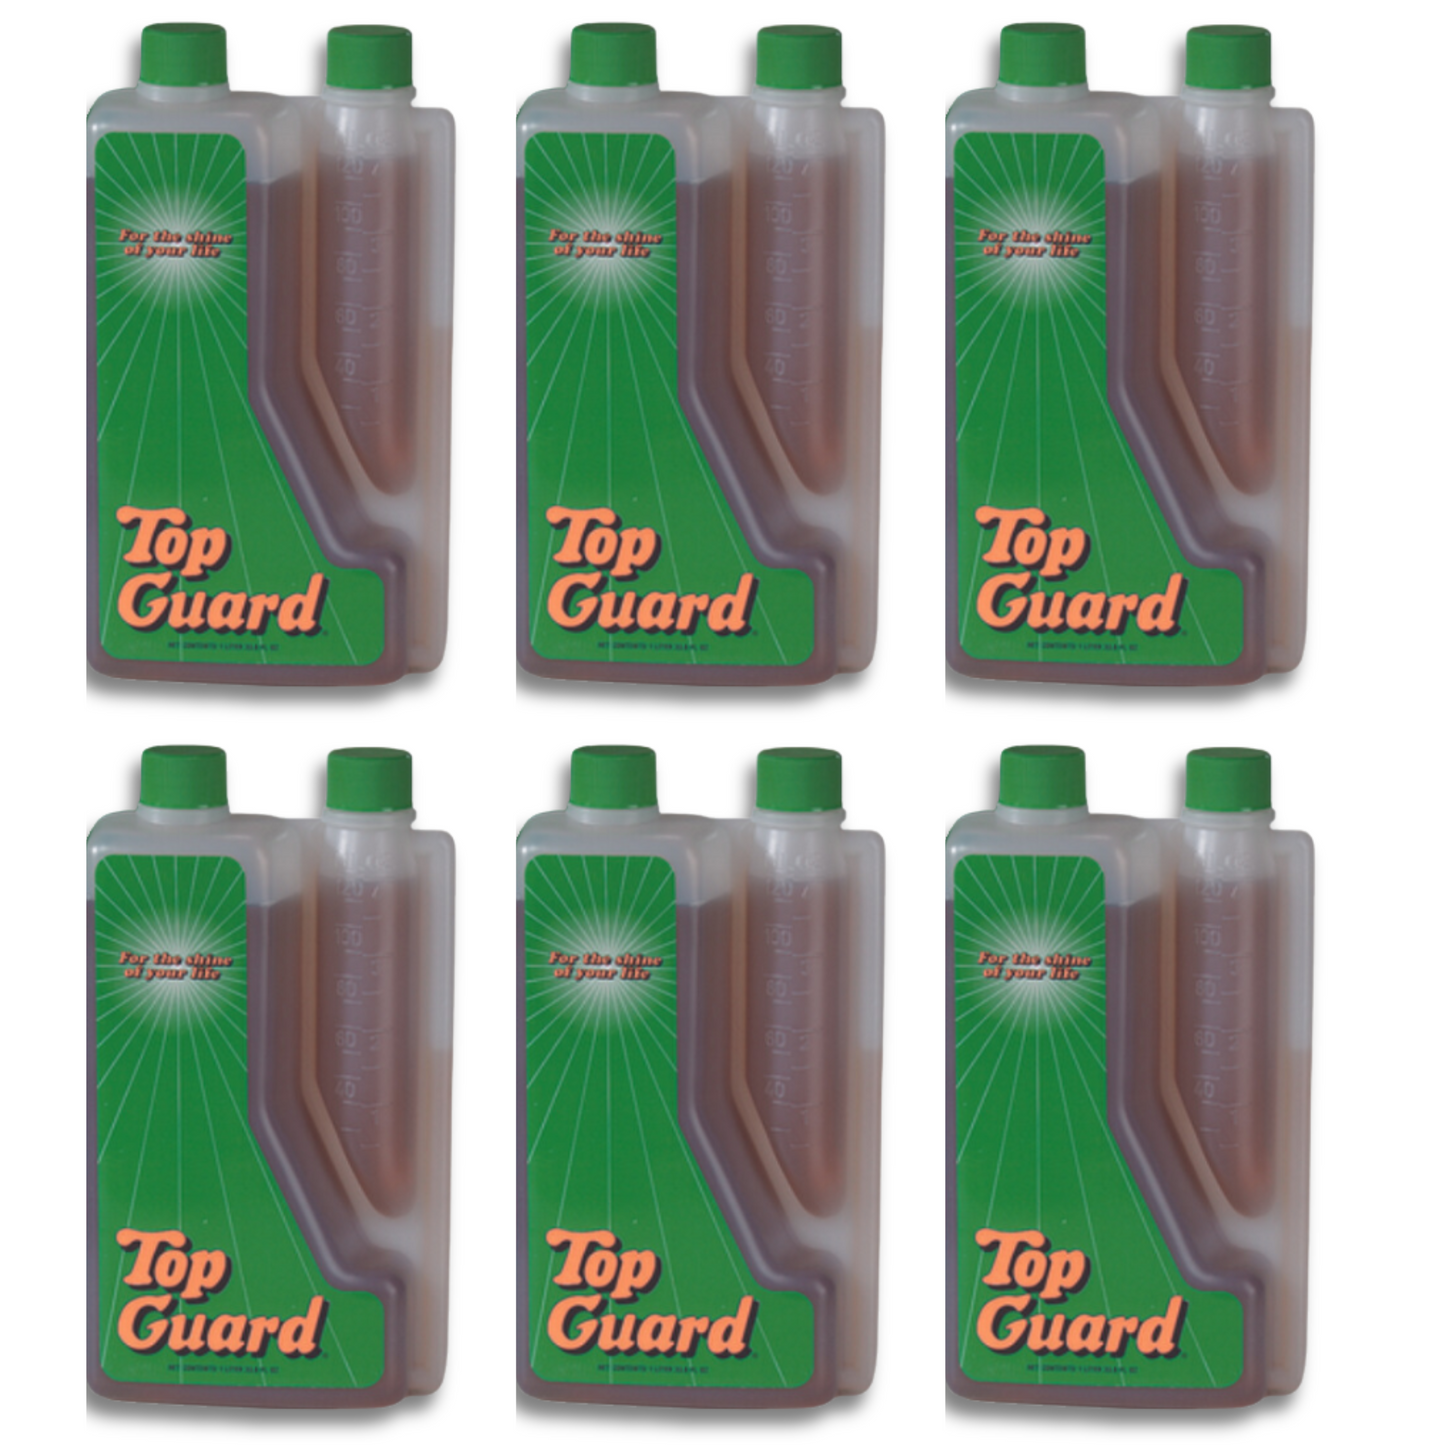 TOP GUARD - Commercial & Industrial Floor Protection, Surface Shield, Creates a Lustrous Wet Look Shine Floor Finish (6x1 Litter Box)